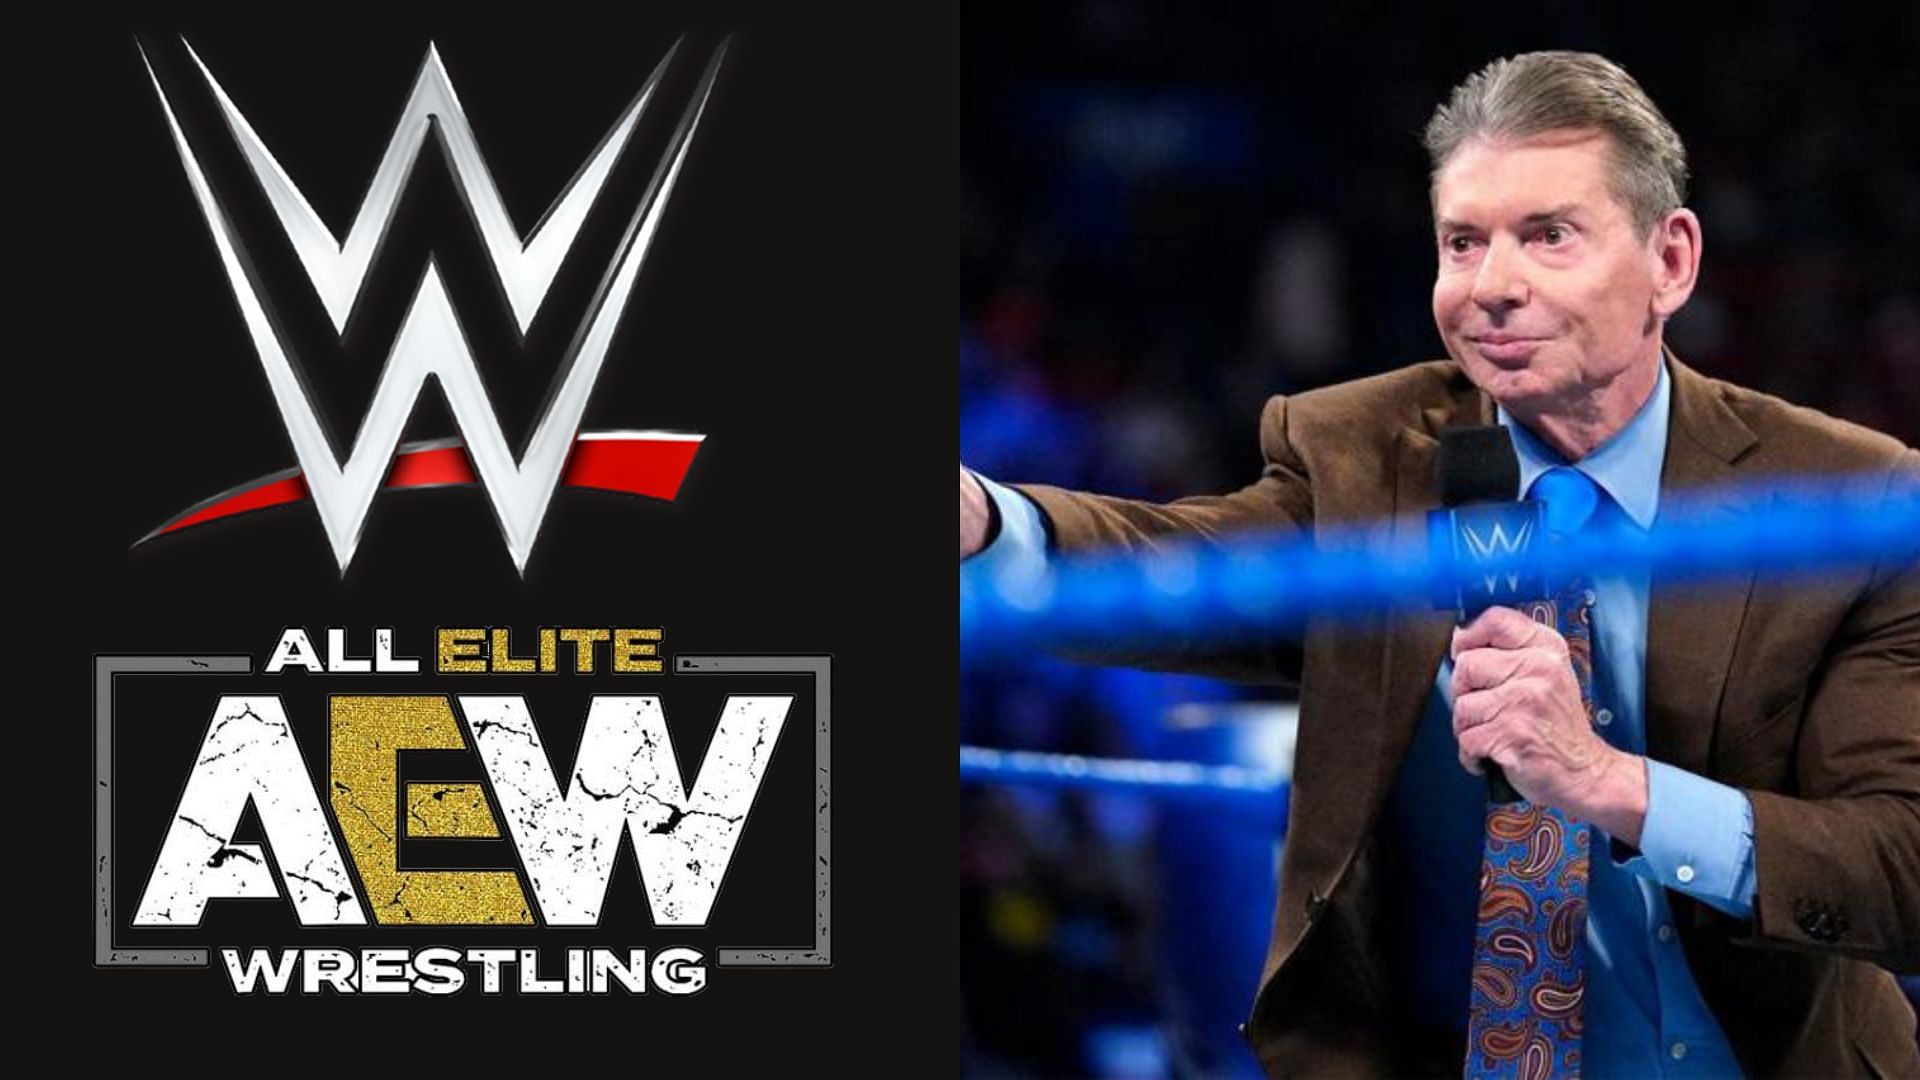 Vince McMahon recently announced his retirement!